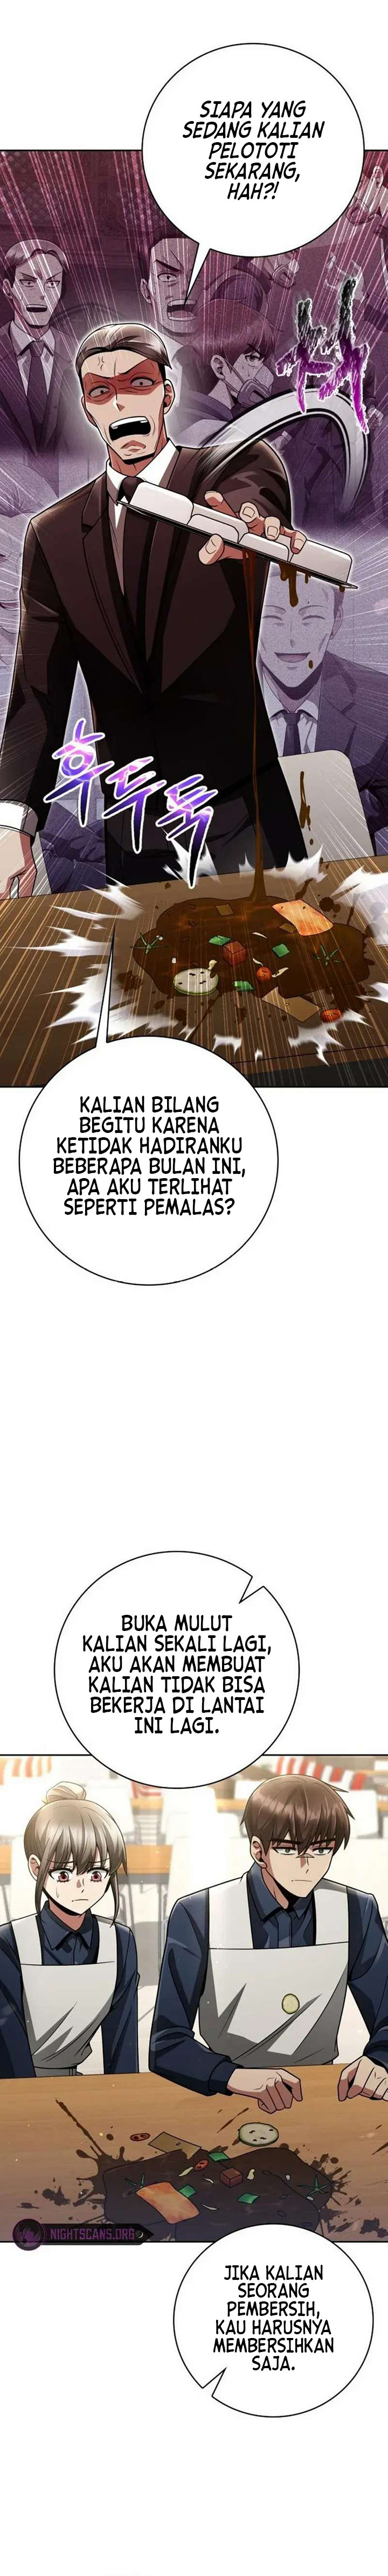 Dilarang COPAS - situs resmi www.mangacanblog.com - Komik clever cleaning life of the returned genius hunter 042 - chapter 42 43 Indonesia clever cleaning life of the returned genius hunter 042 - chapter 42 Terbaru 23|Baca Manga Komik Indonesia|Mangacan